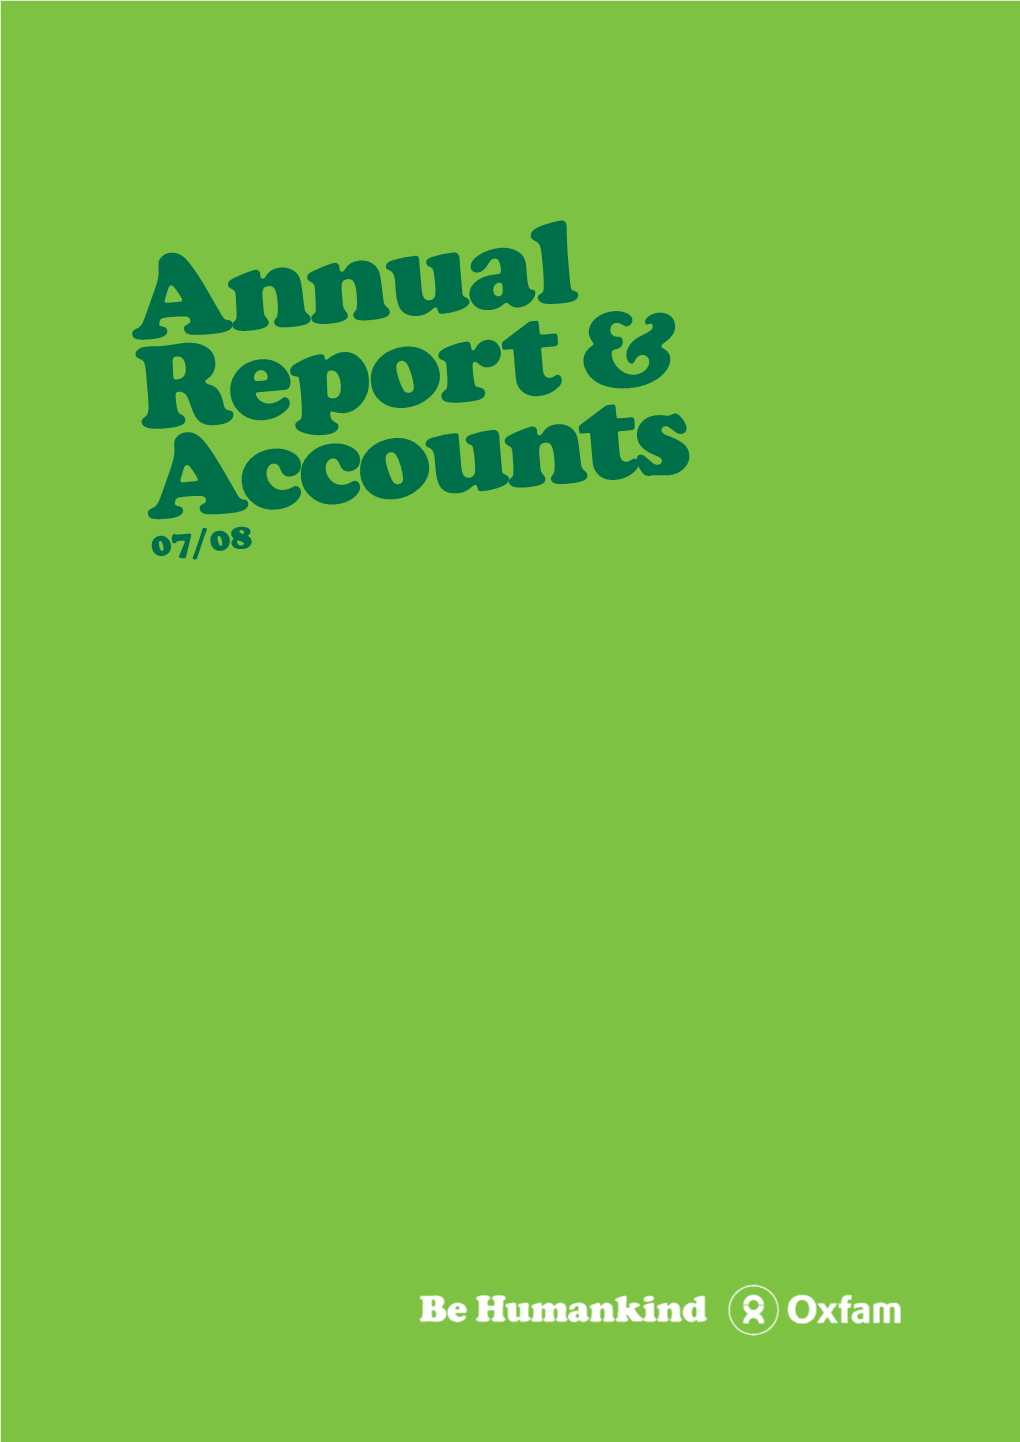 Annual Report and Accounts 2007/08: Contents